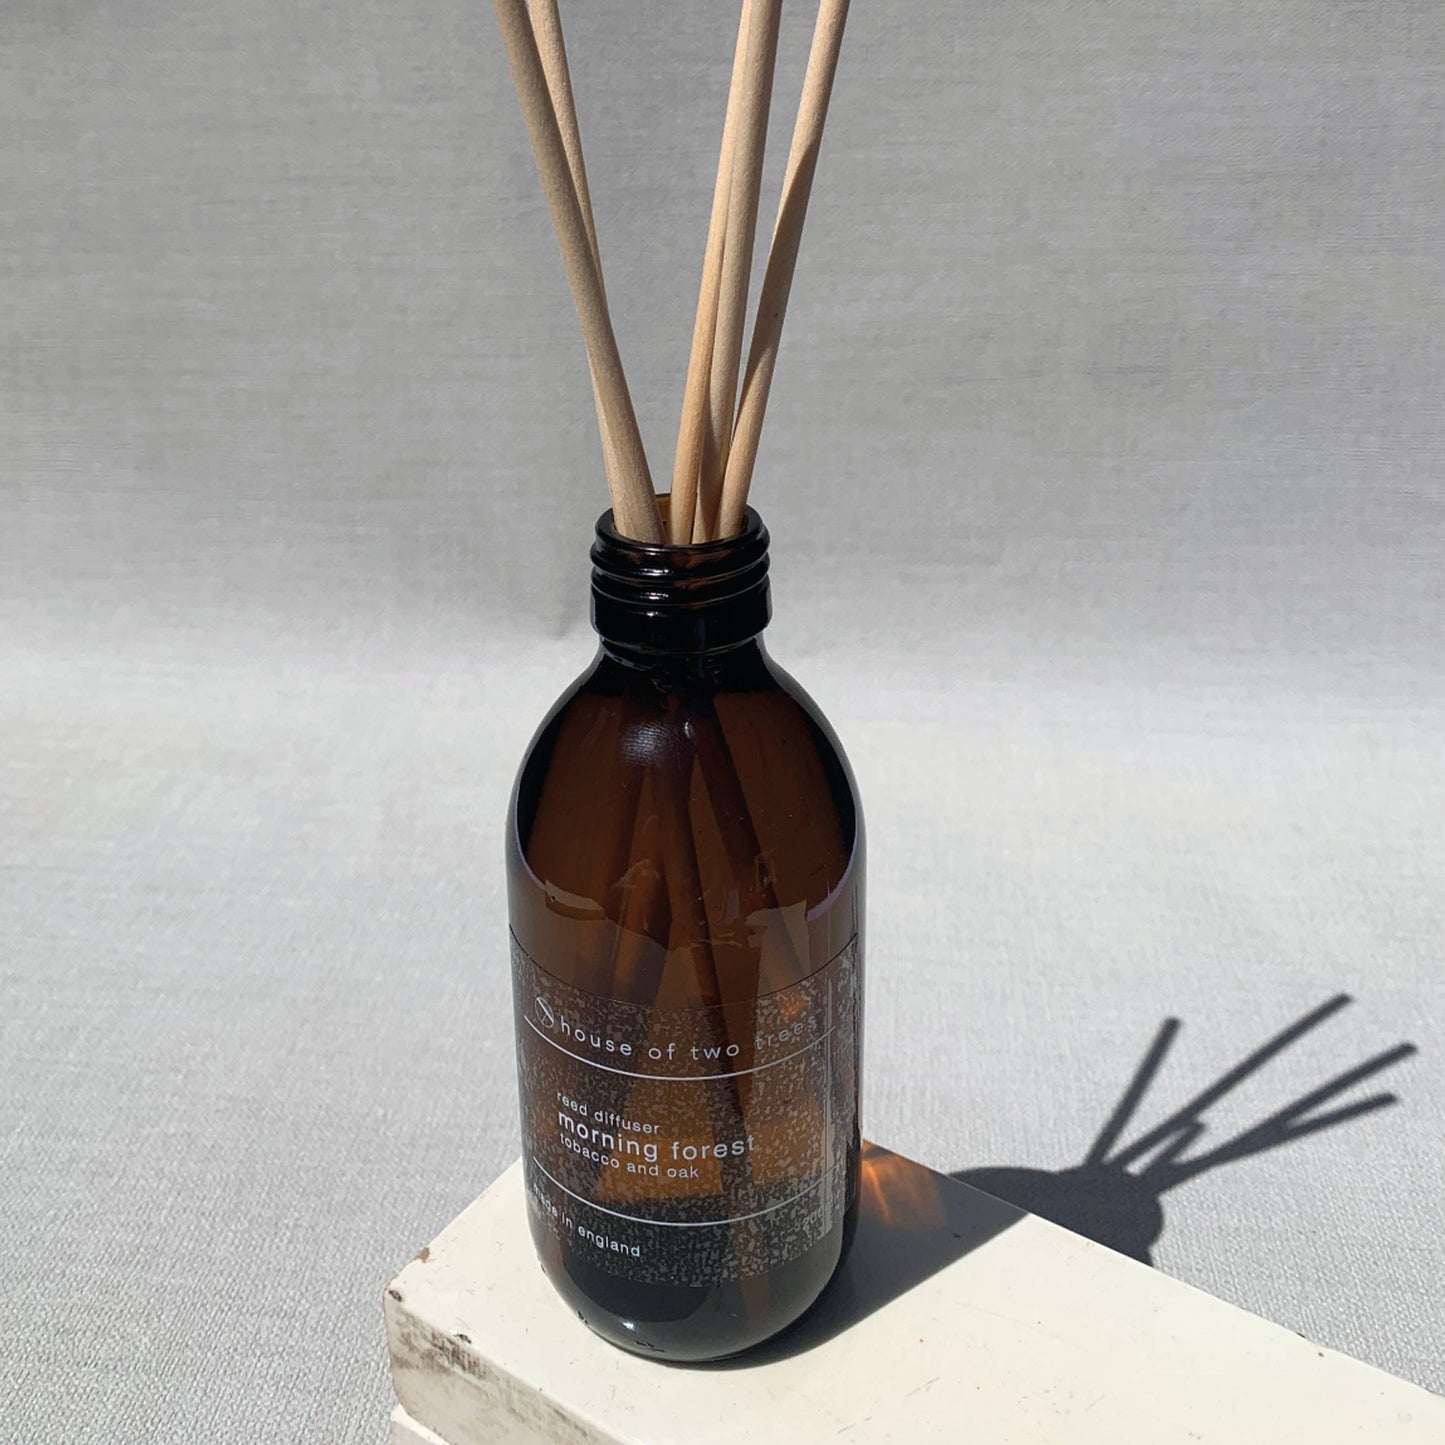 House of Two Trees Morning Forest Reed Diffuser - Tobacco & Oak